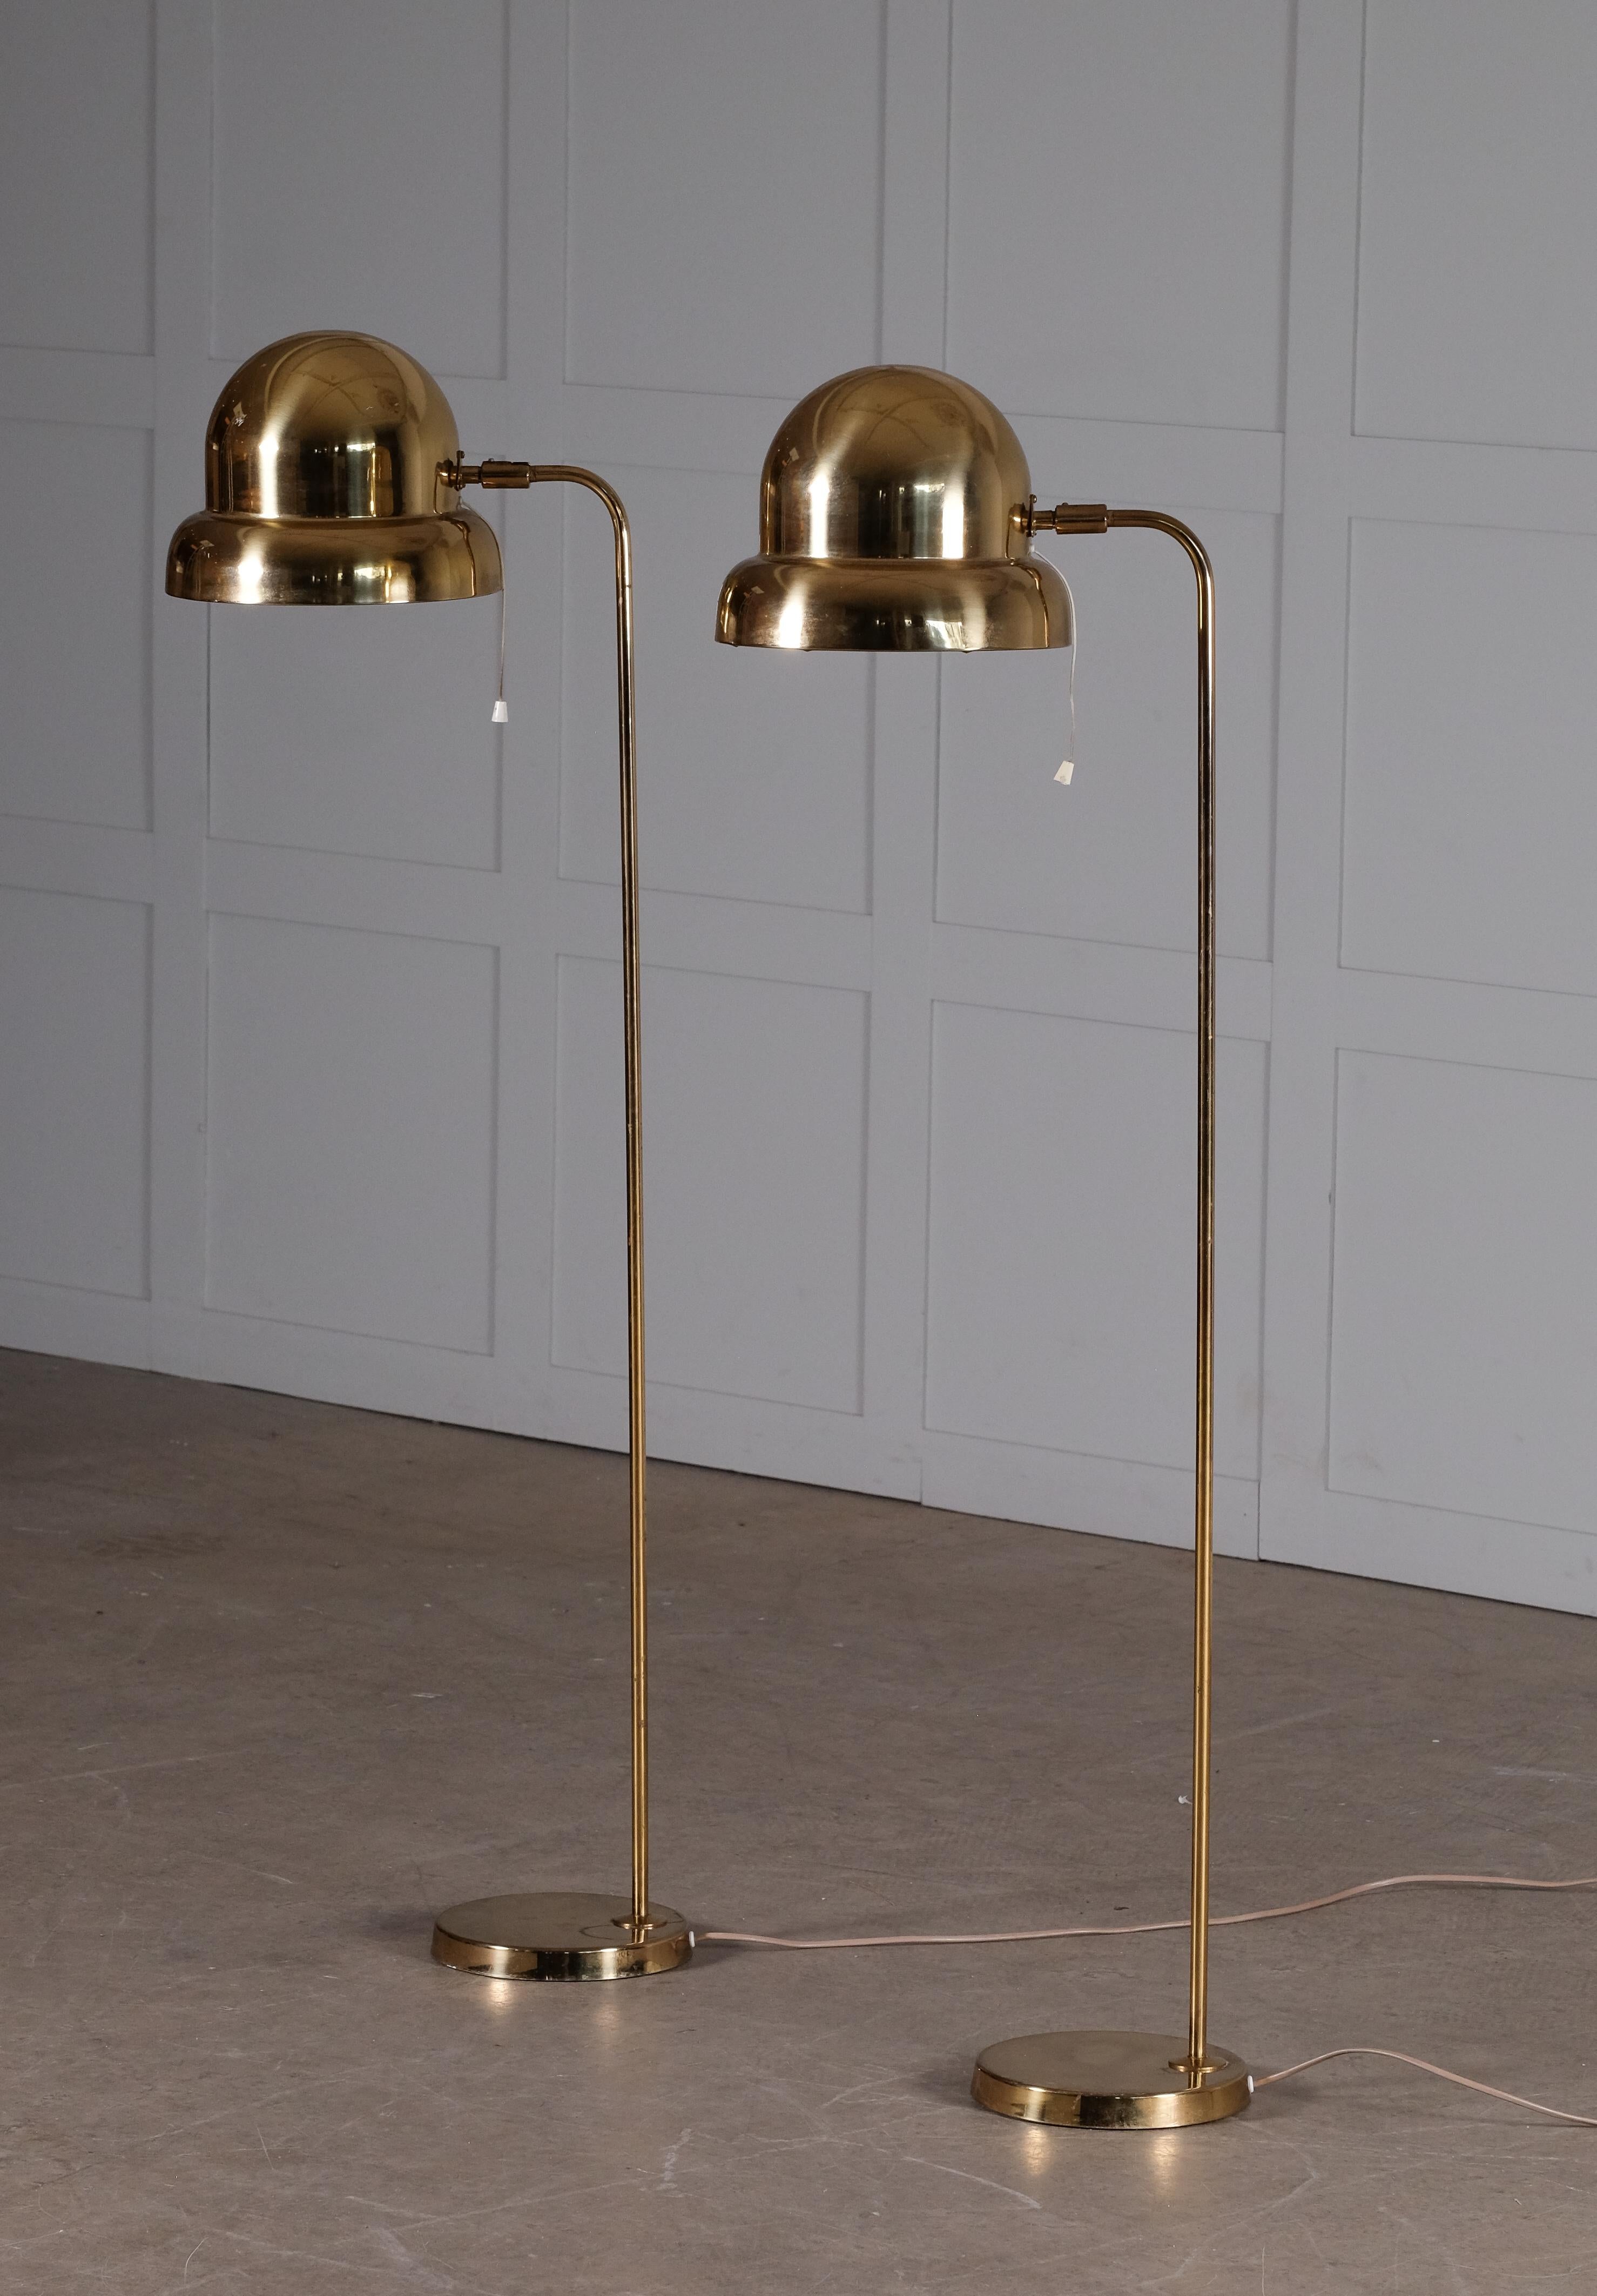 Pair of floor lamp in brass, model G-120M manufactured by Bergboms, Sweden, 1960s.
Measures: Height 120 cm.